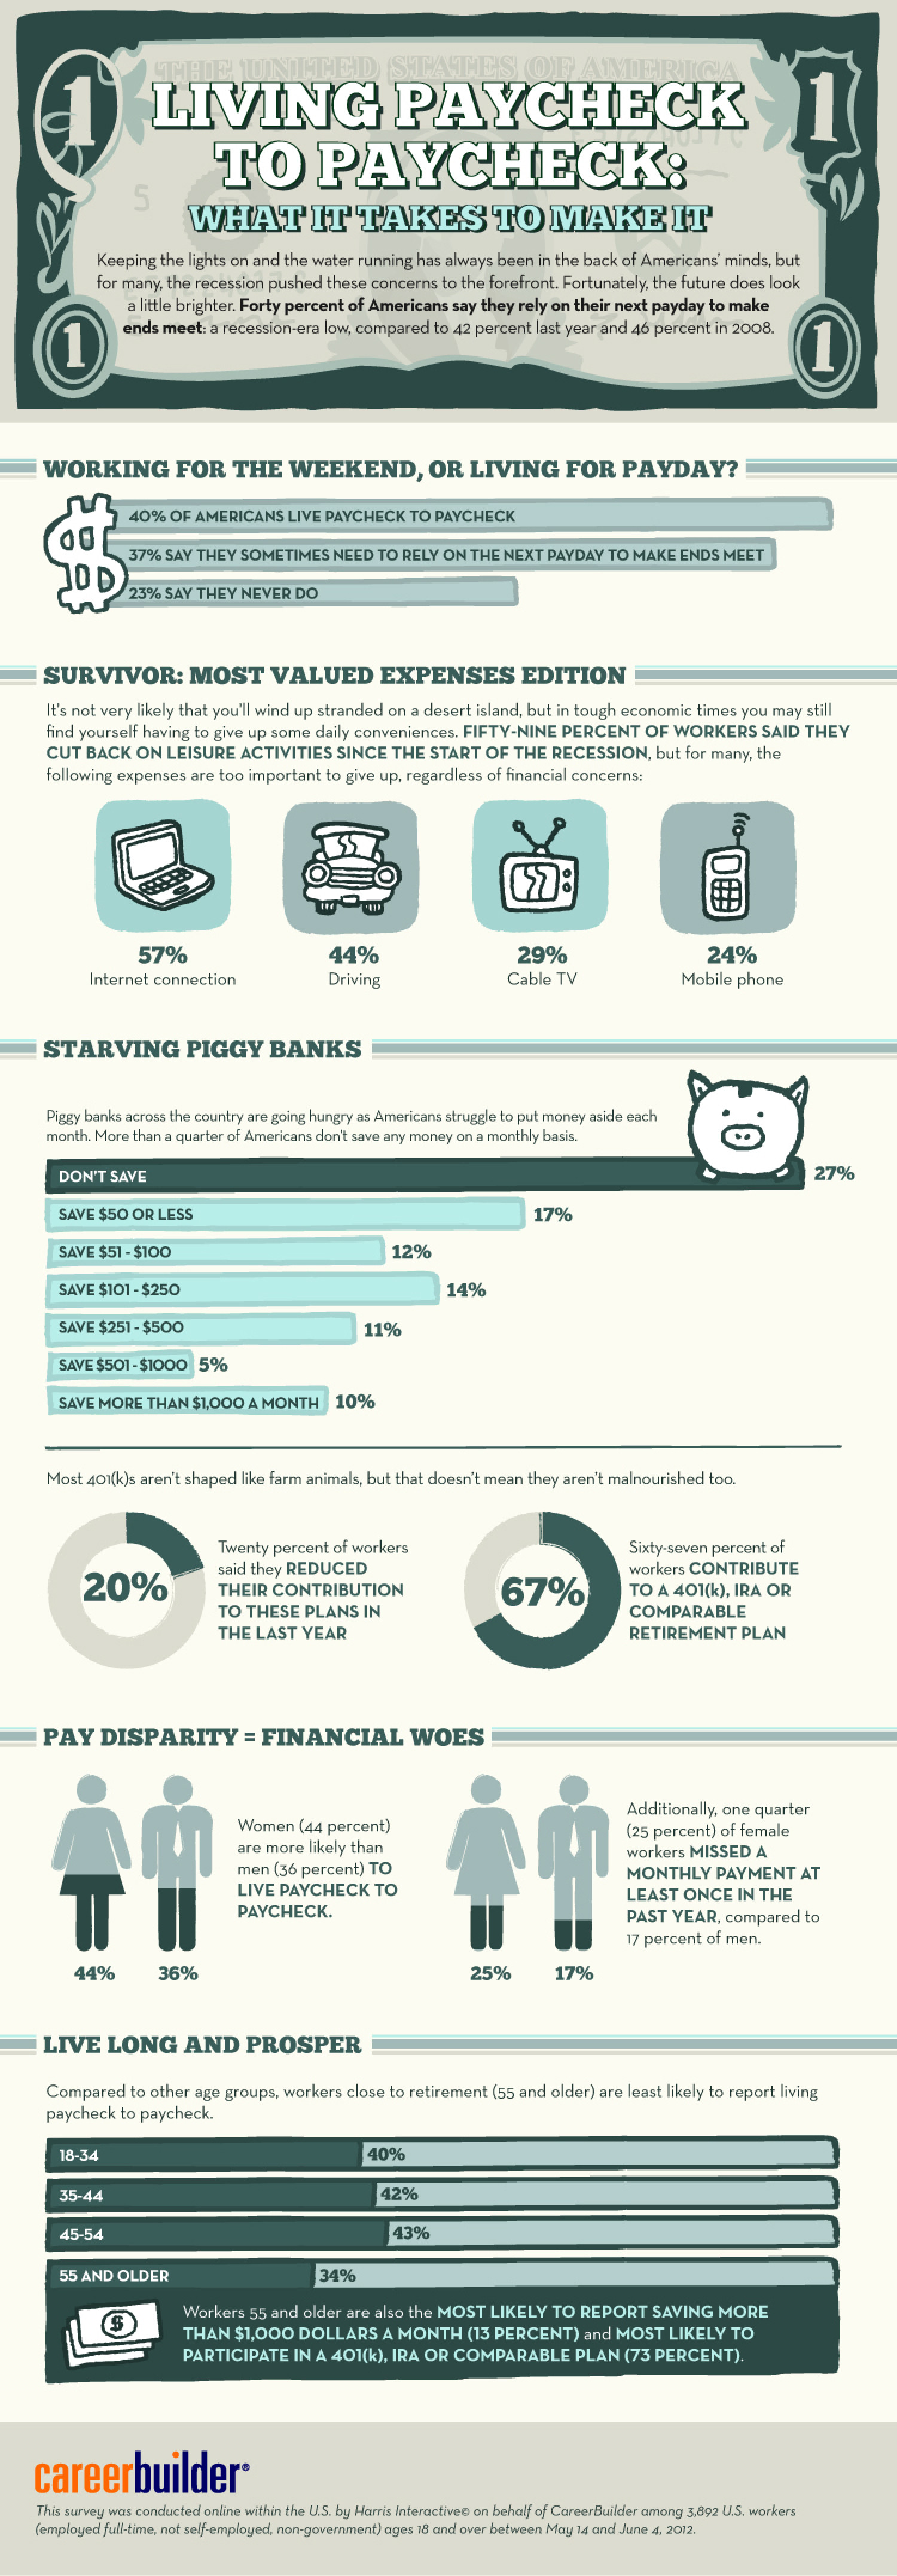 Living Paycheck to Paycheck: What it Takes to Make It Infographic